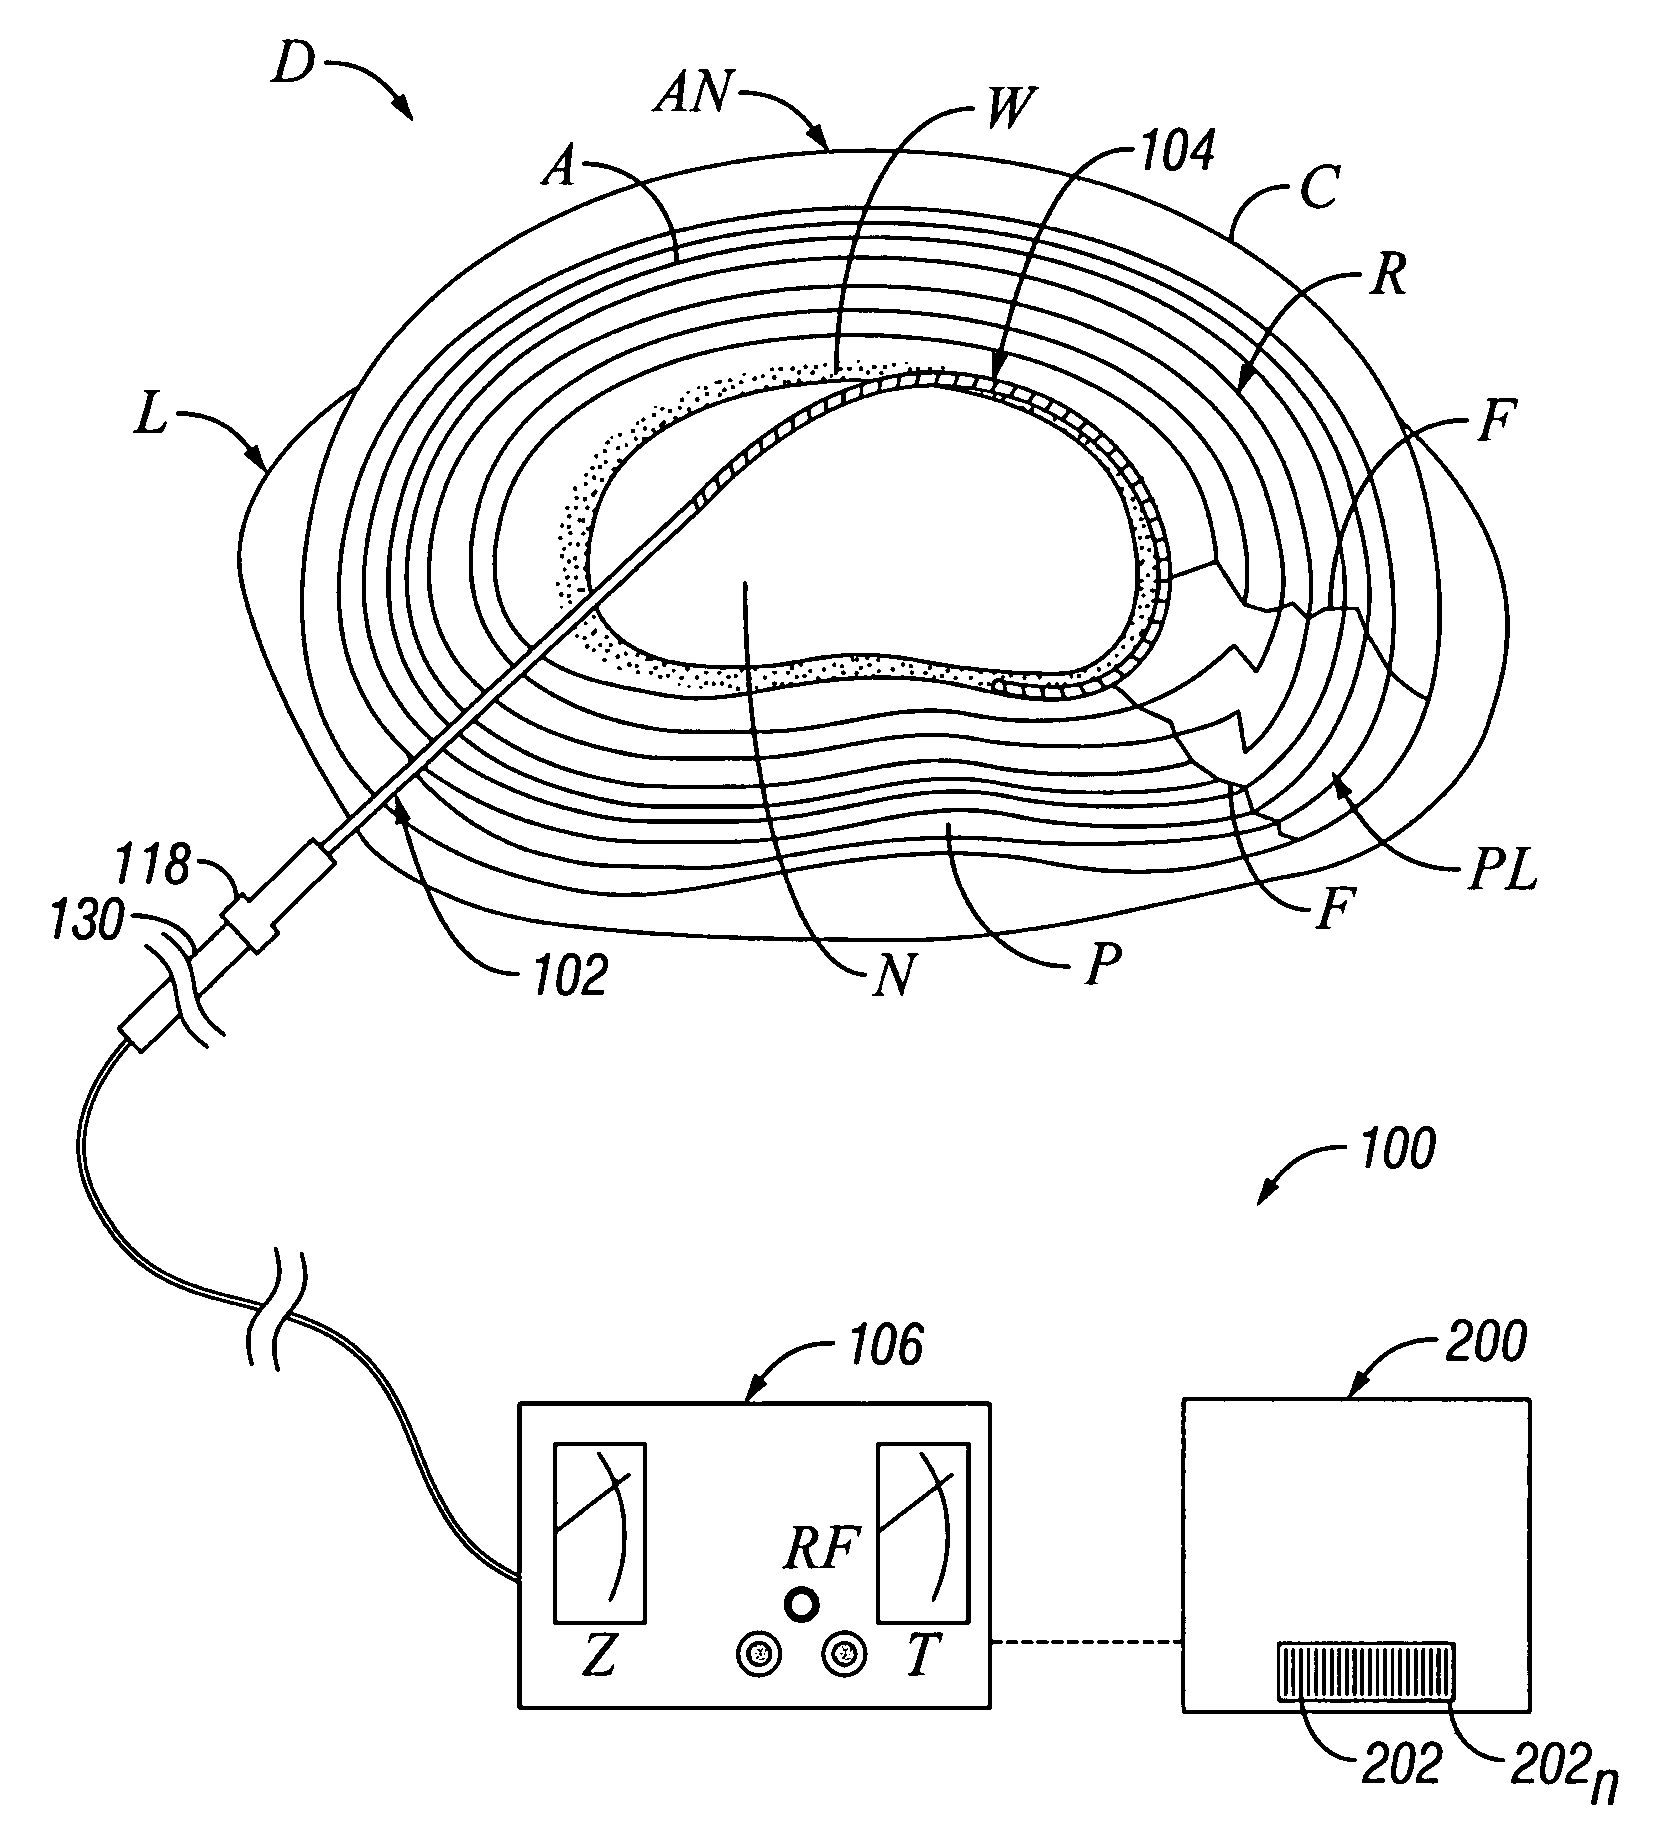 Systems and methods for thermally profiling radiofrequency electrodes